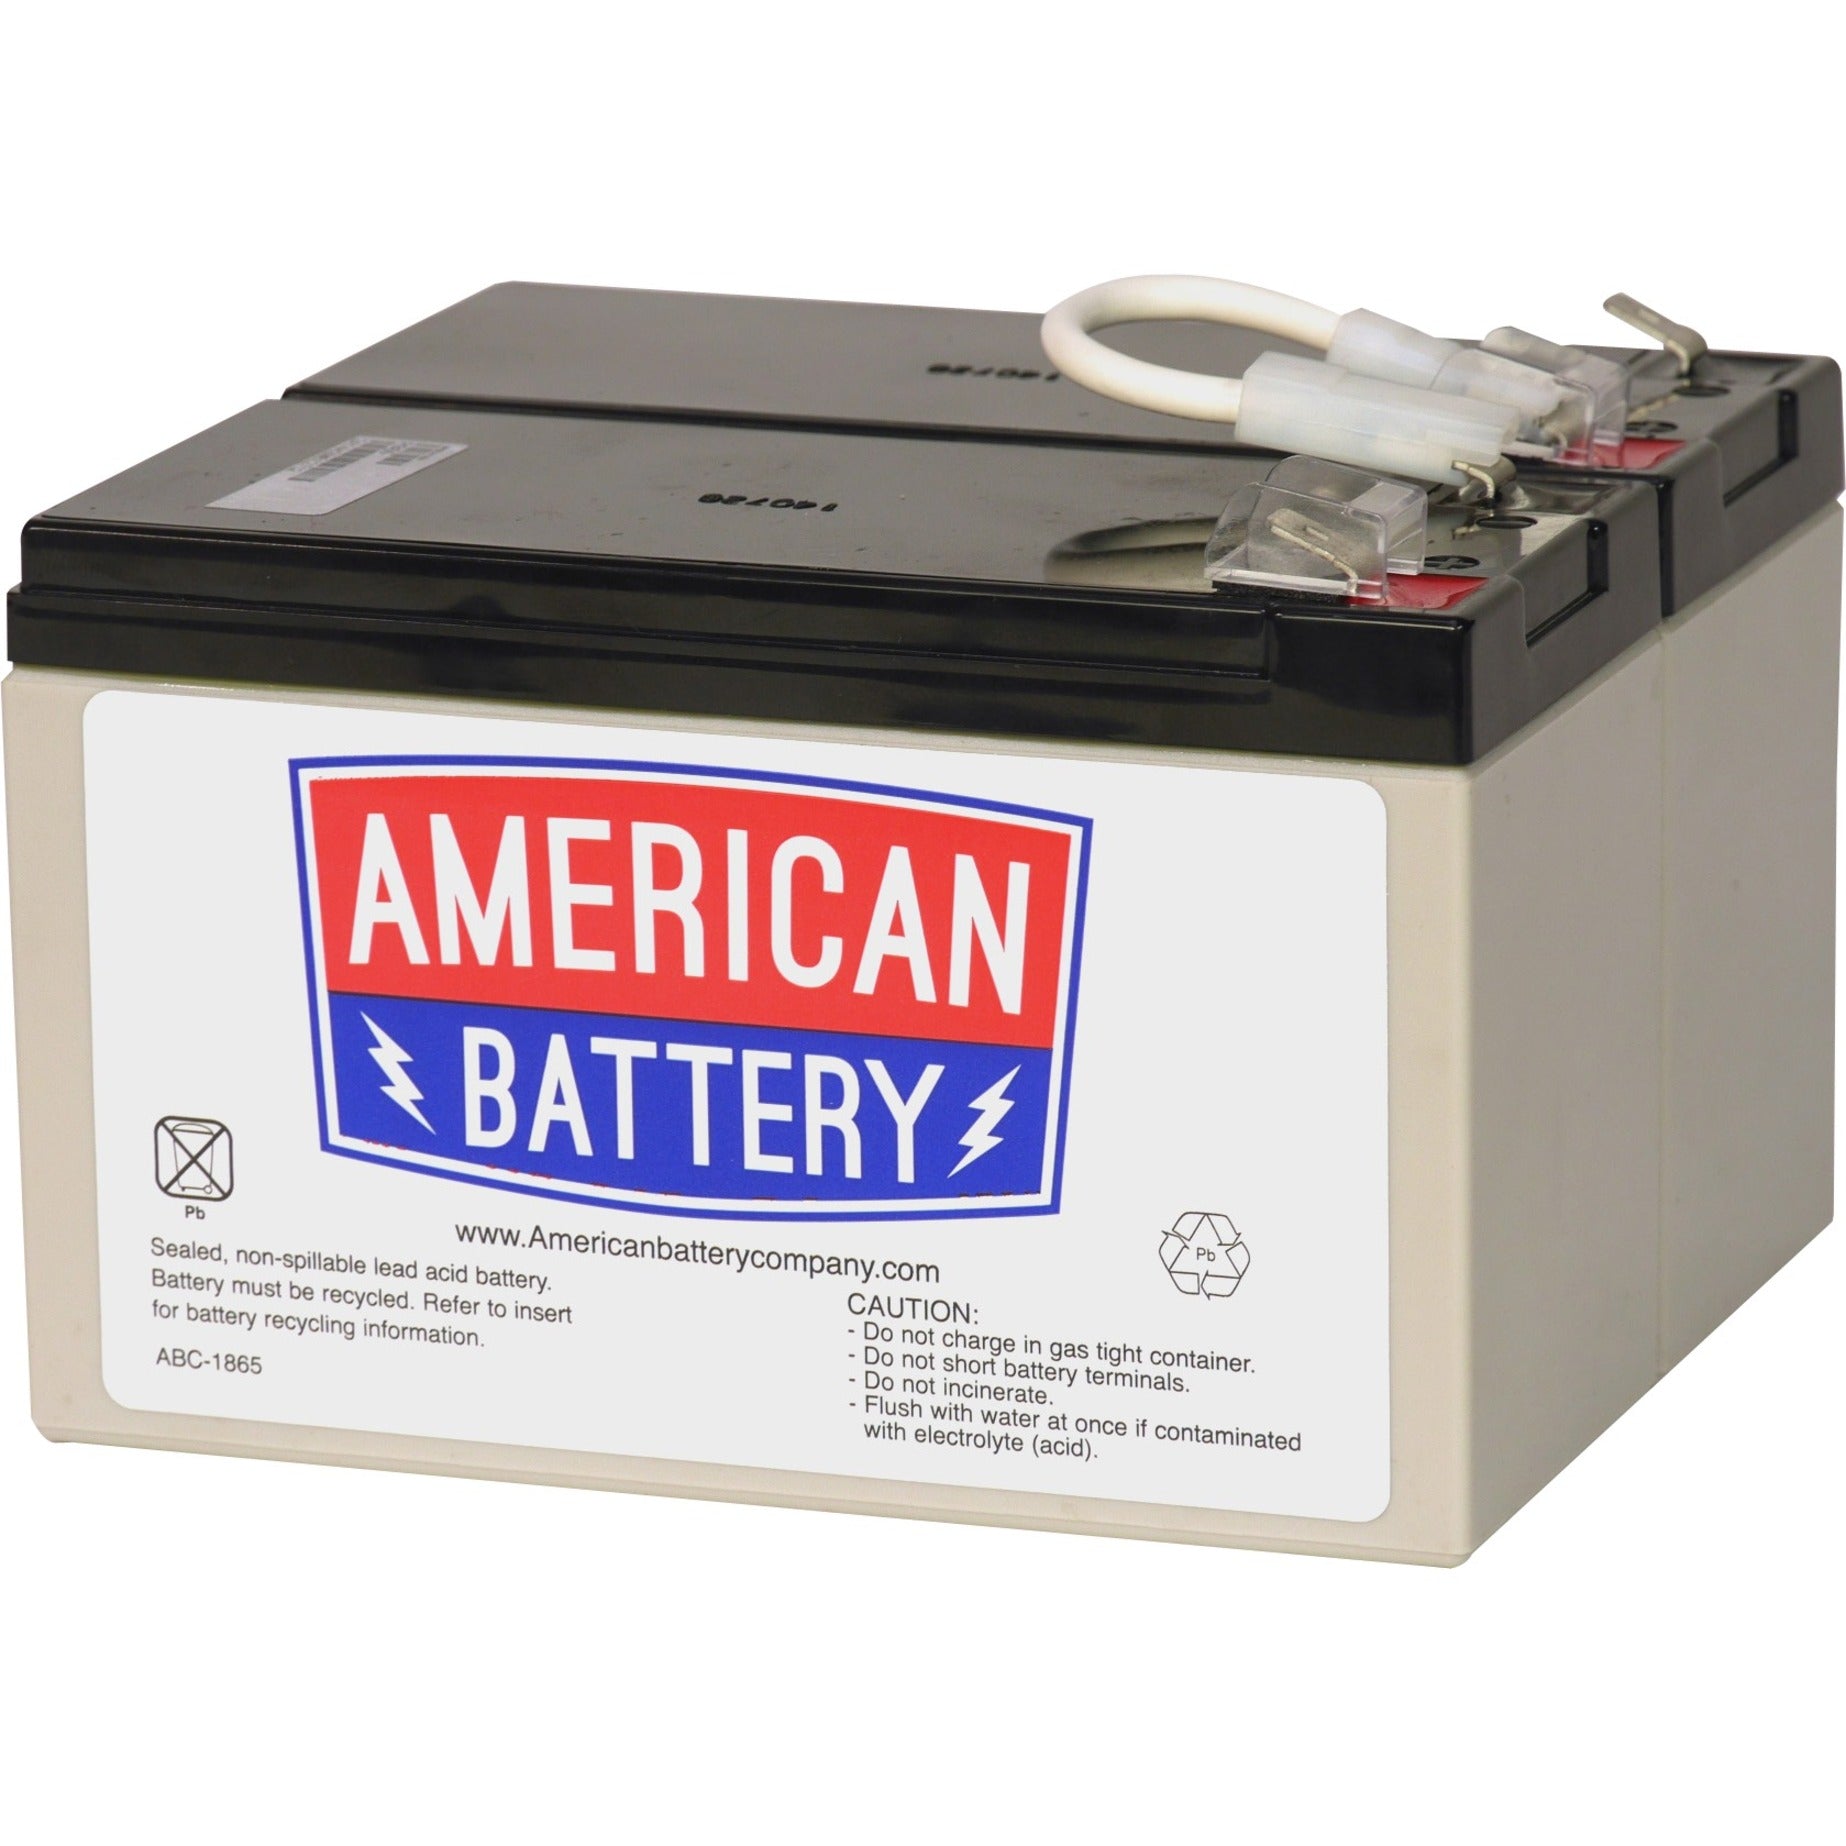 ABC RBC5 Replacement Battery Cartridge, 2 Year Warranty, Hot Swappable, 7000mAh, 12V DC